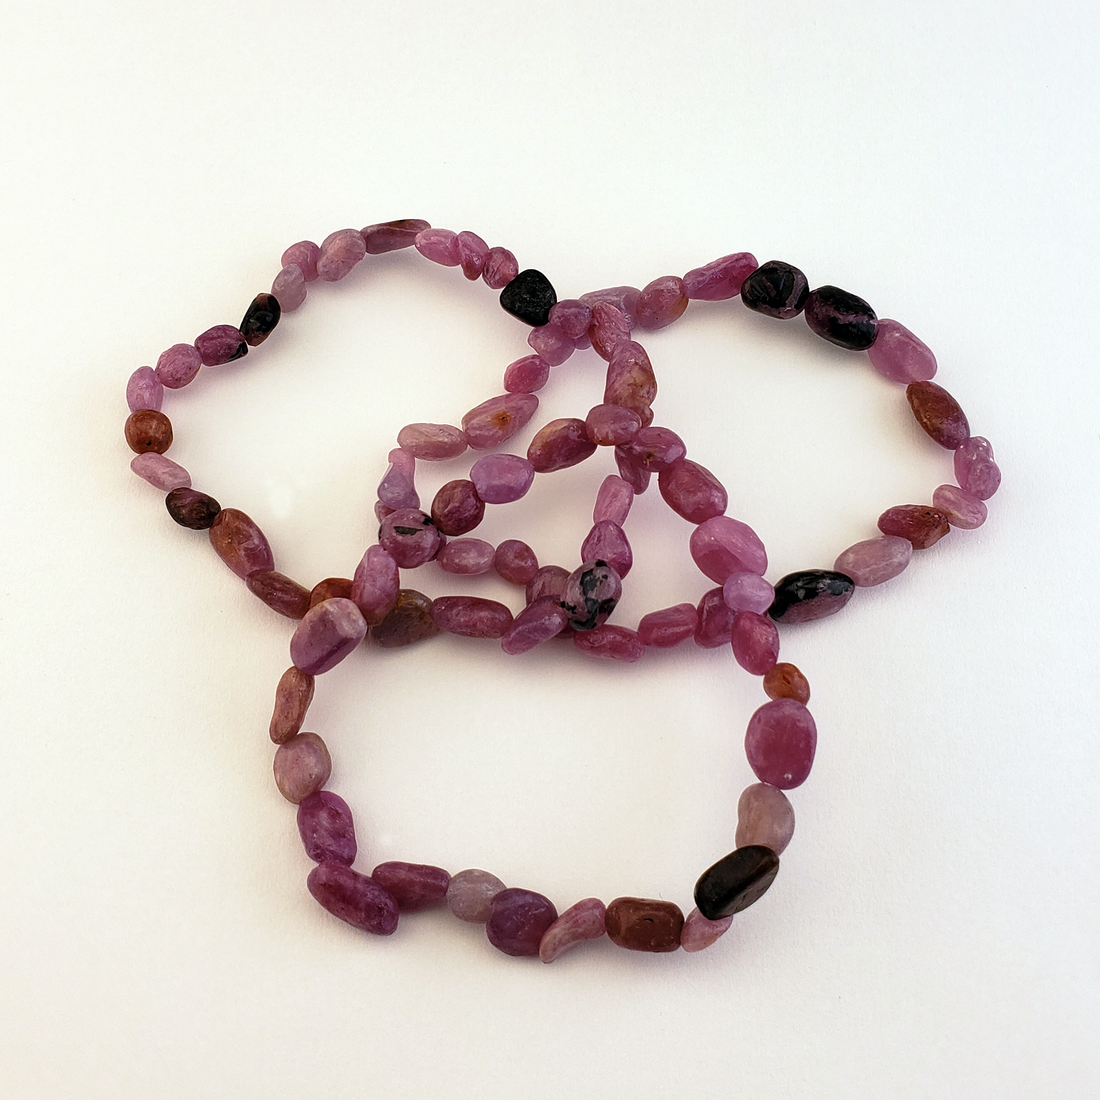 Ruby Corundum Natural Nugget Bead Bracelet - Forming Triquetra with Three Bracelets